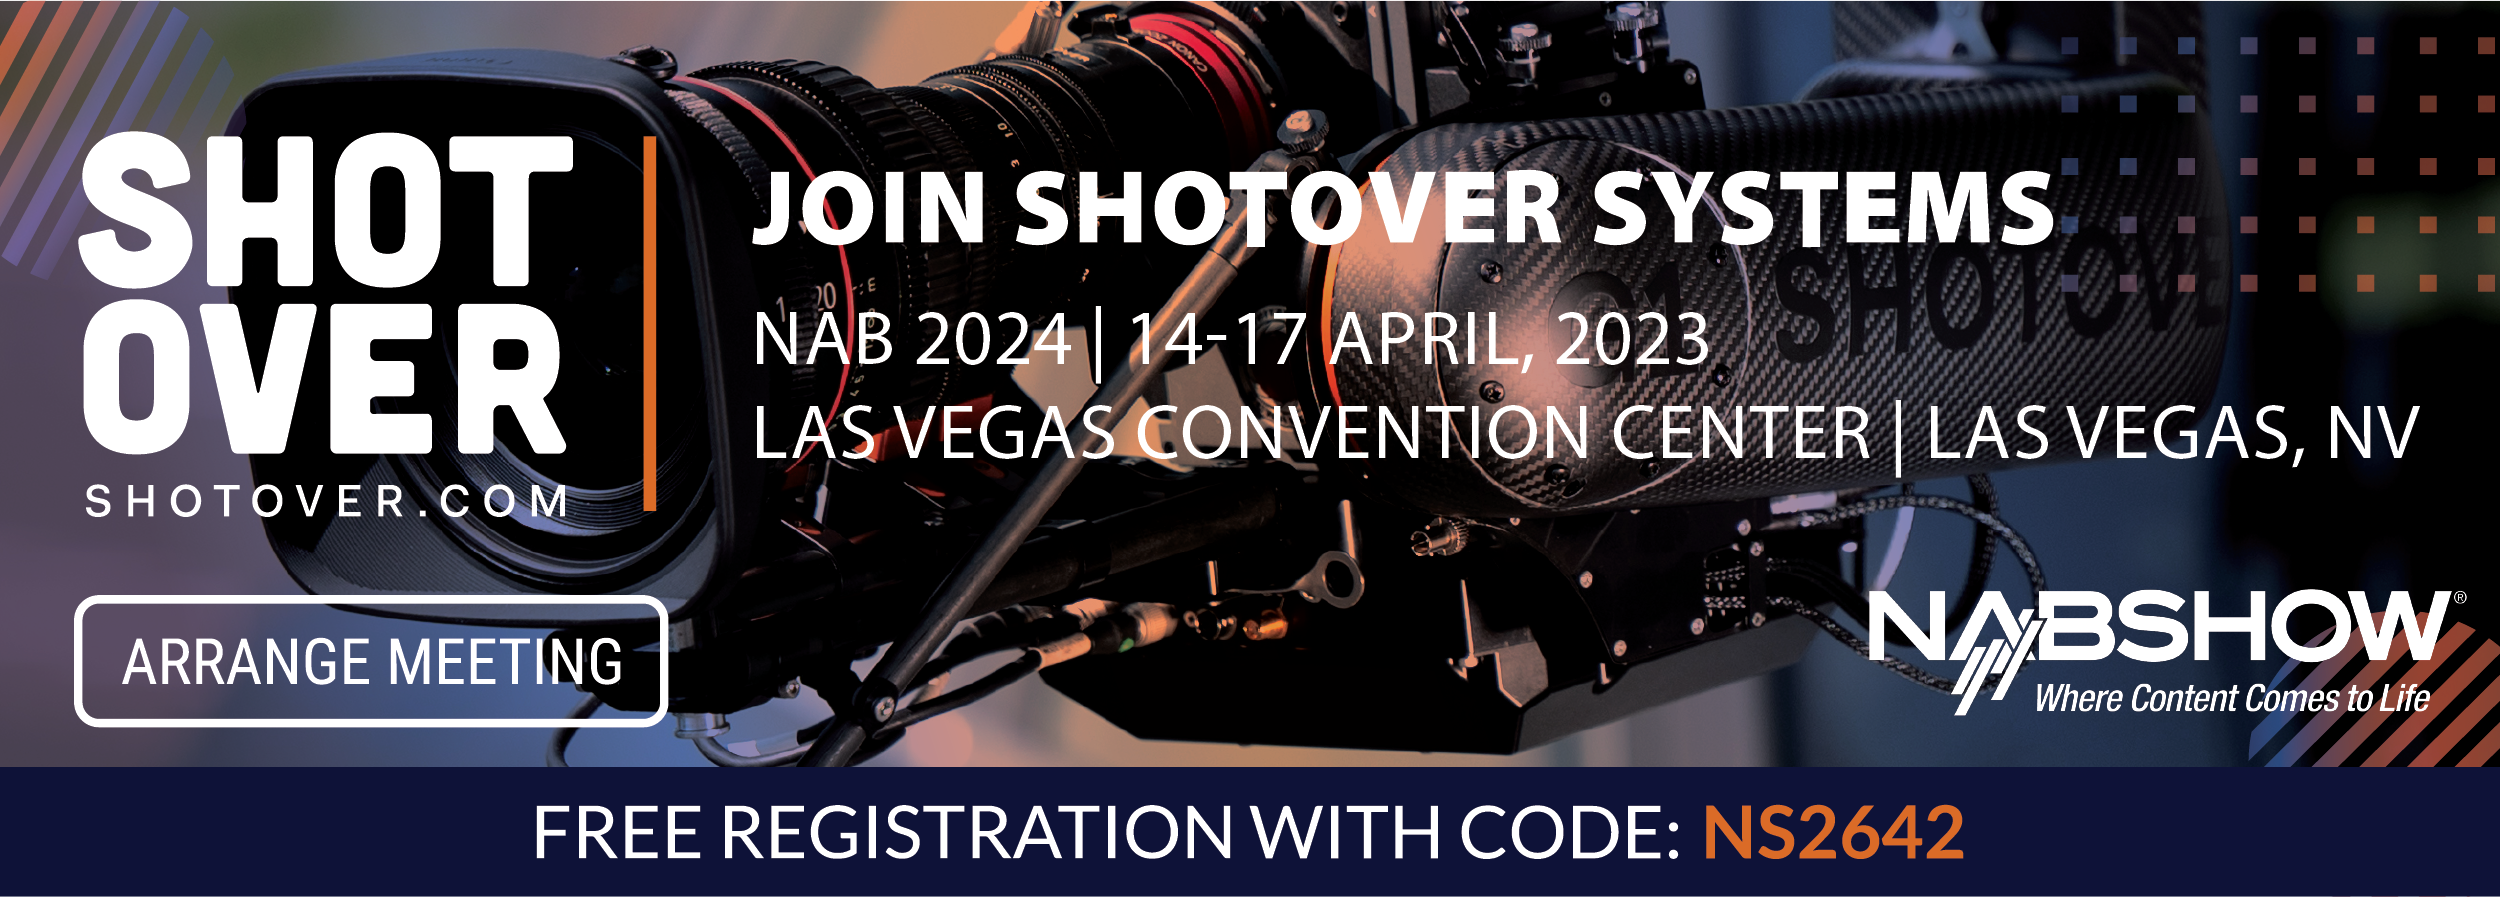 Meet the SHOTOVER Team at NAB: Two Ways to Connect!